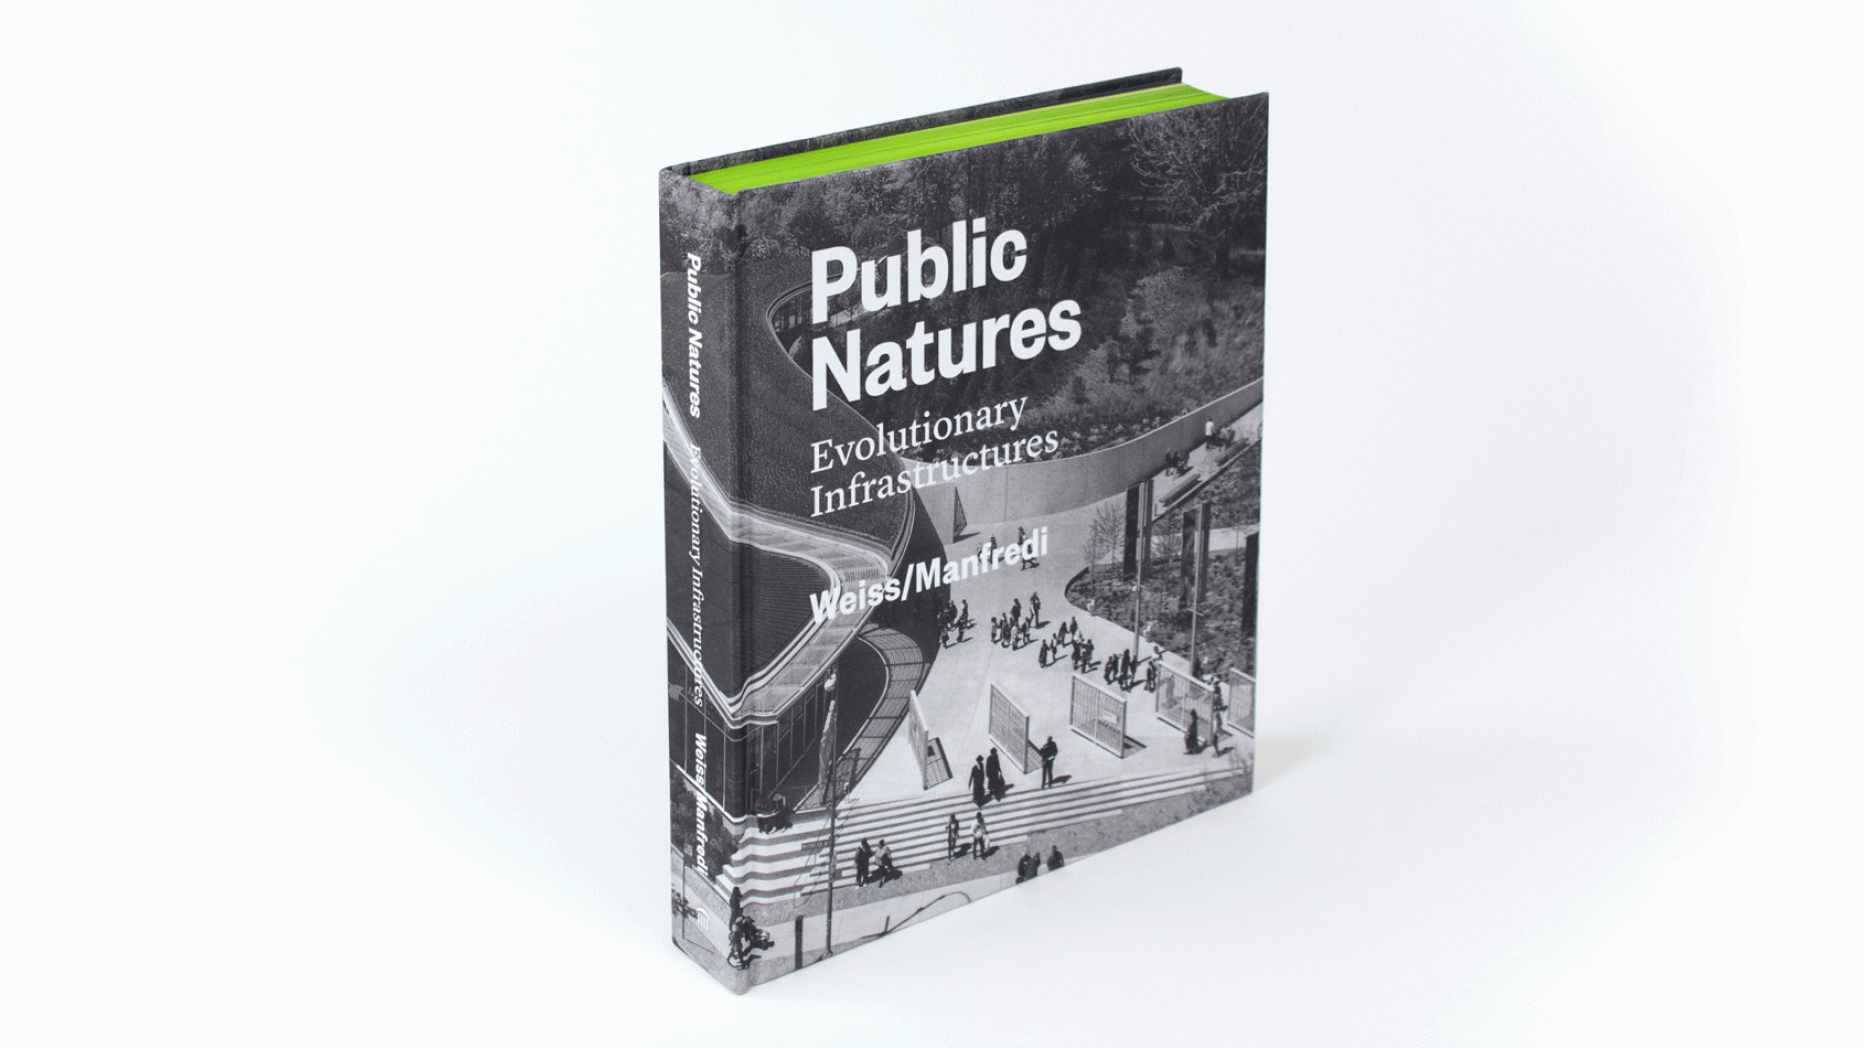 Copy of "Public Natures: Evolutionary infrastucture"